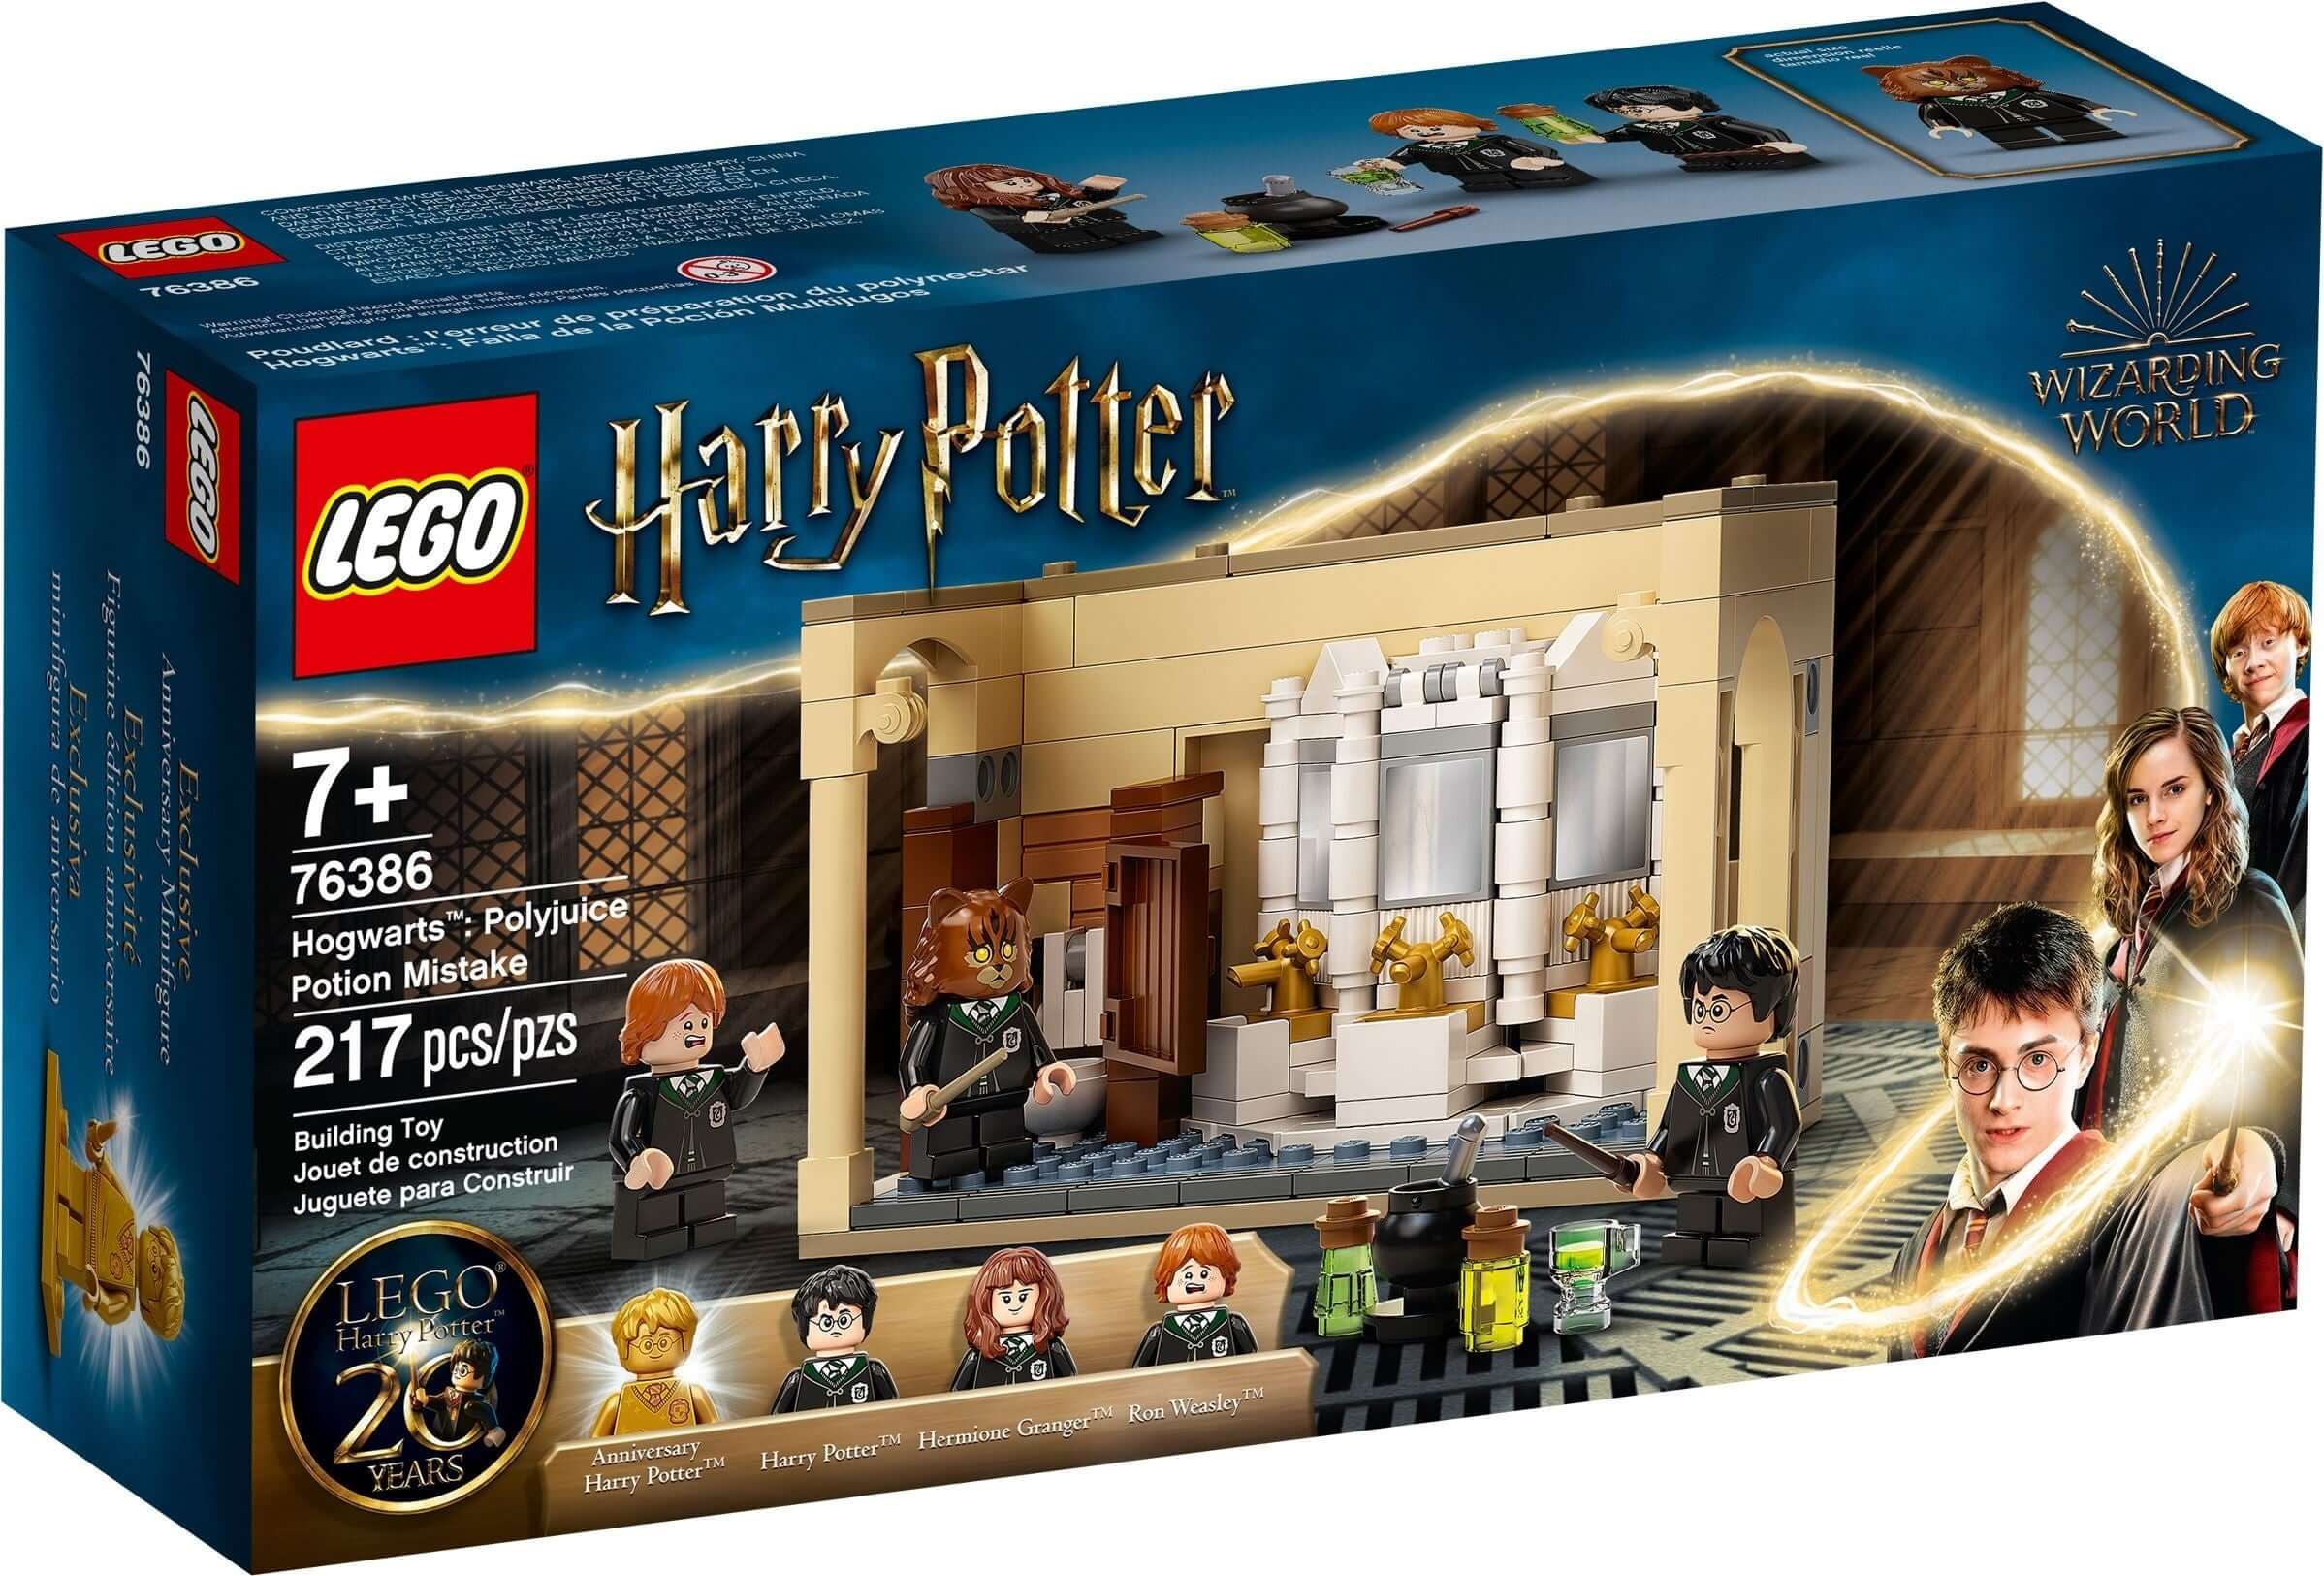 Games Review: Lego Harry Potter Collection (Switch, 2018) brings the magic  back to the Lego franchise - The AU Review